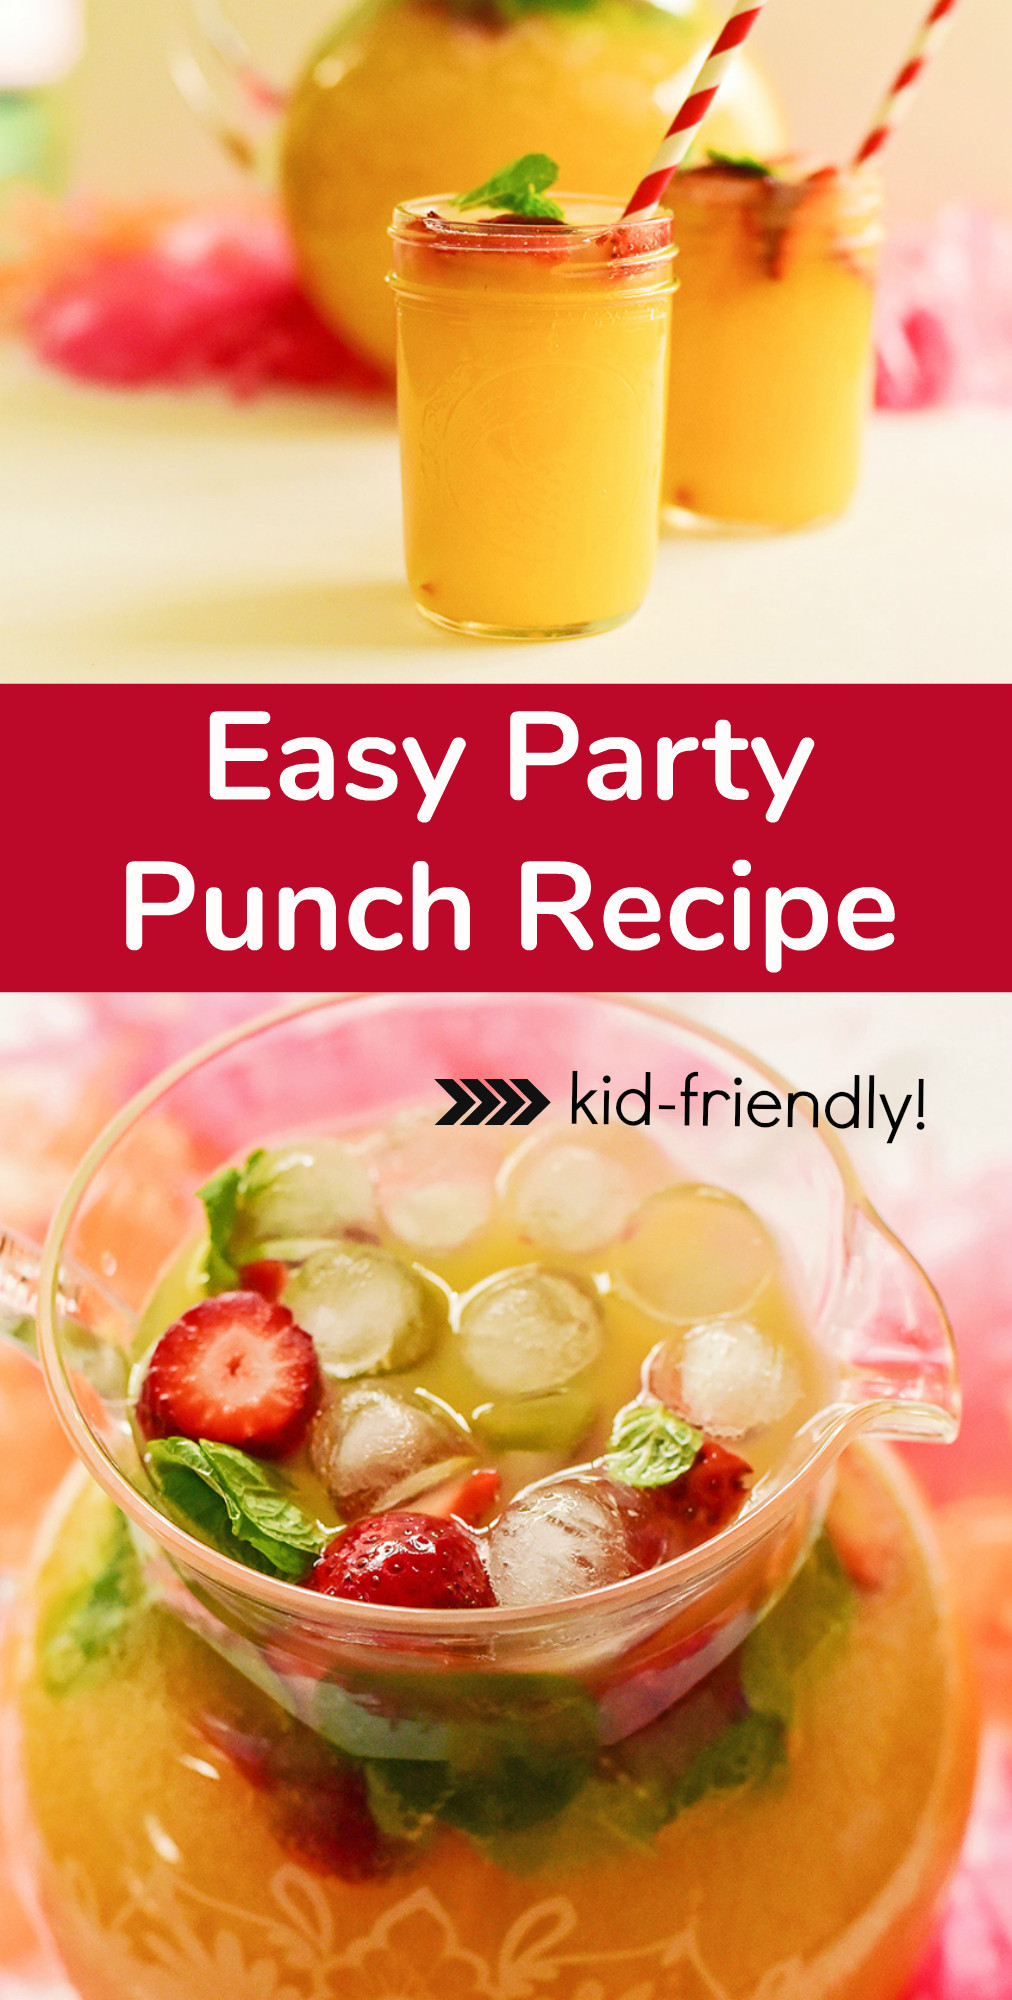 Kid Friendly Punch Bowl Recipes
 Easy Party Punch Recipe Kid Friendly